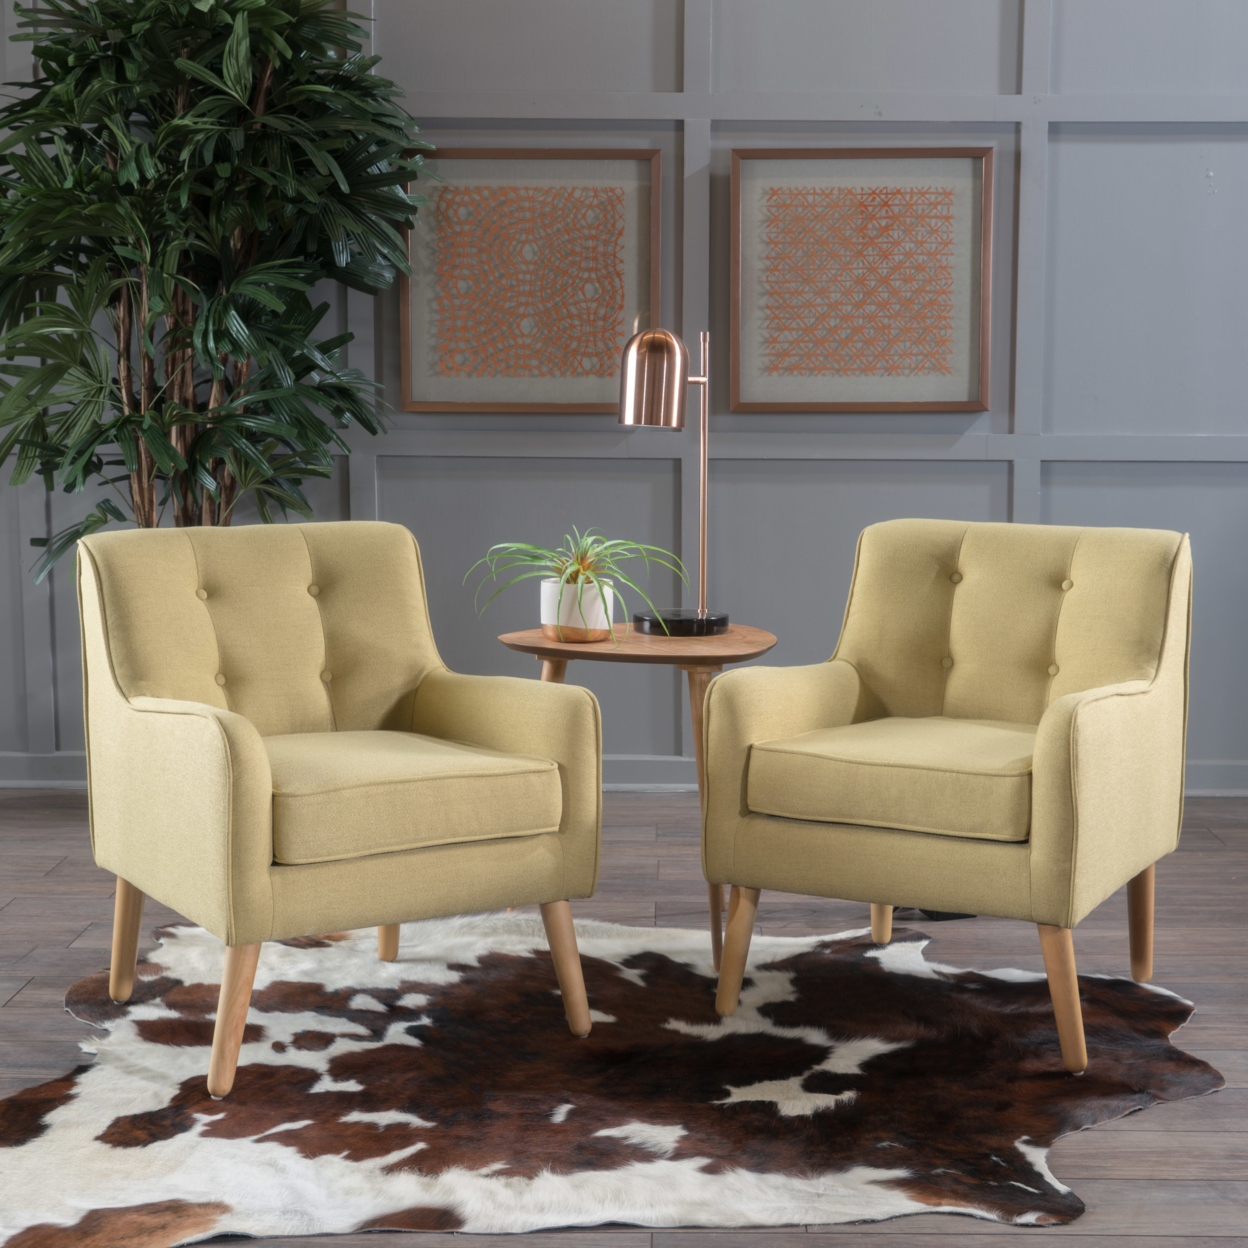 Fontinella Mid Century Tufted Back Fabric Arm Chair - Wasabi, Set Of 2